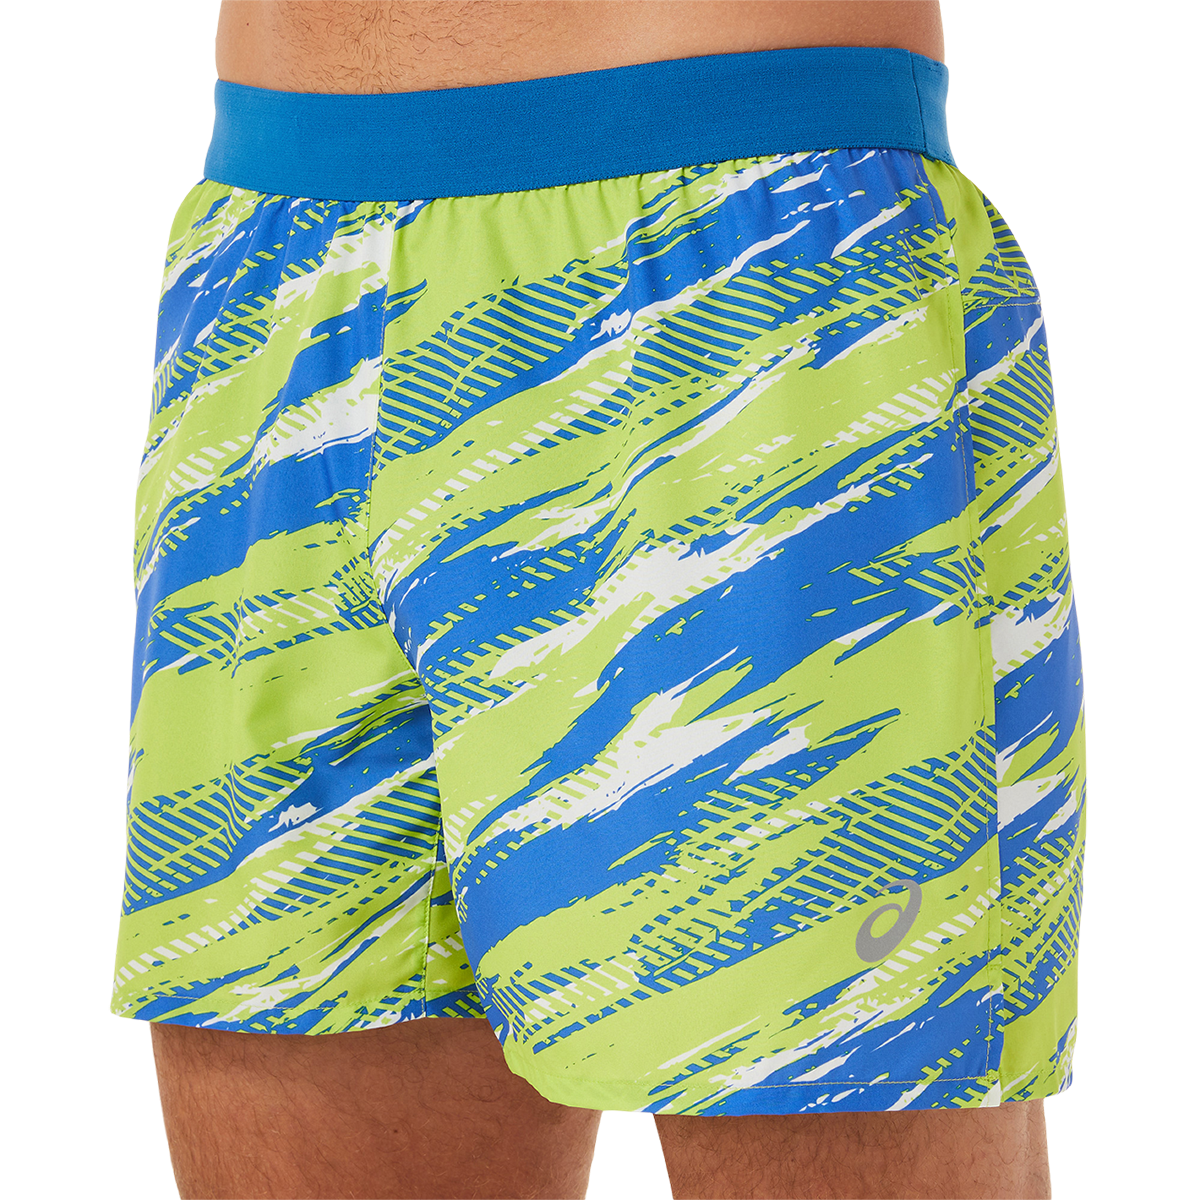 Asics Color Injection Short, , large image number null